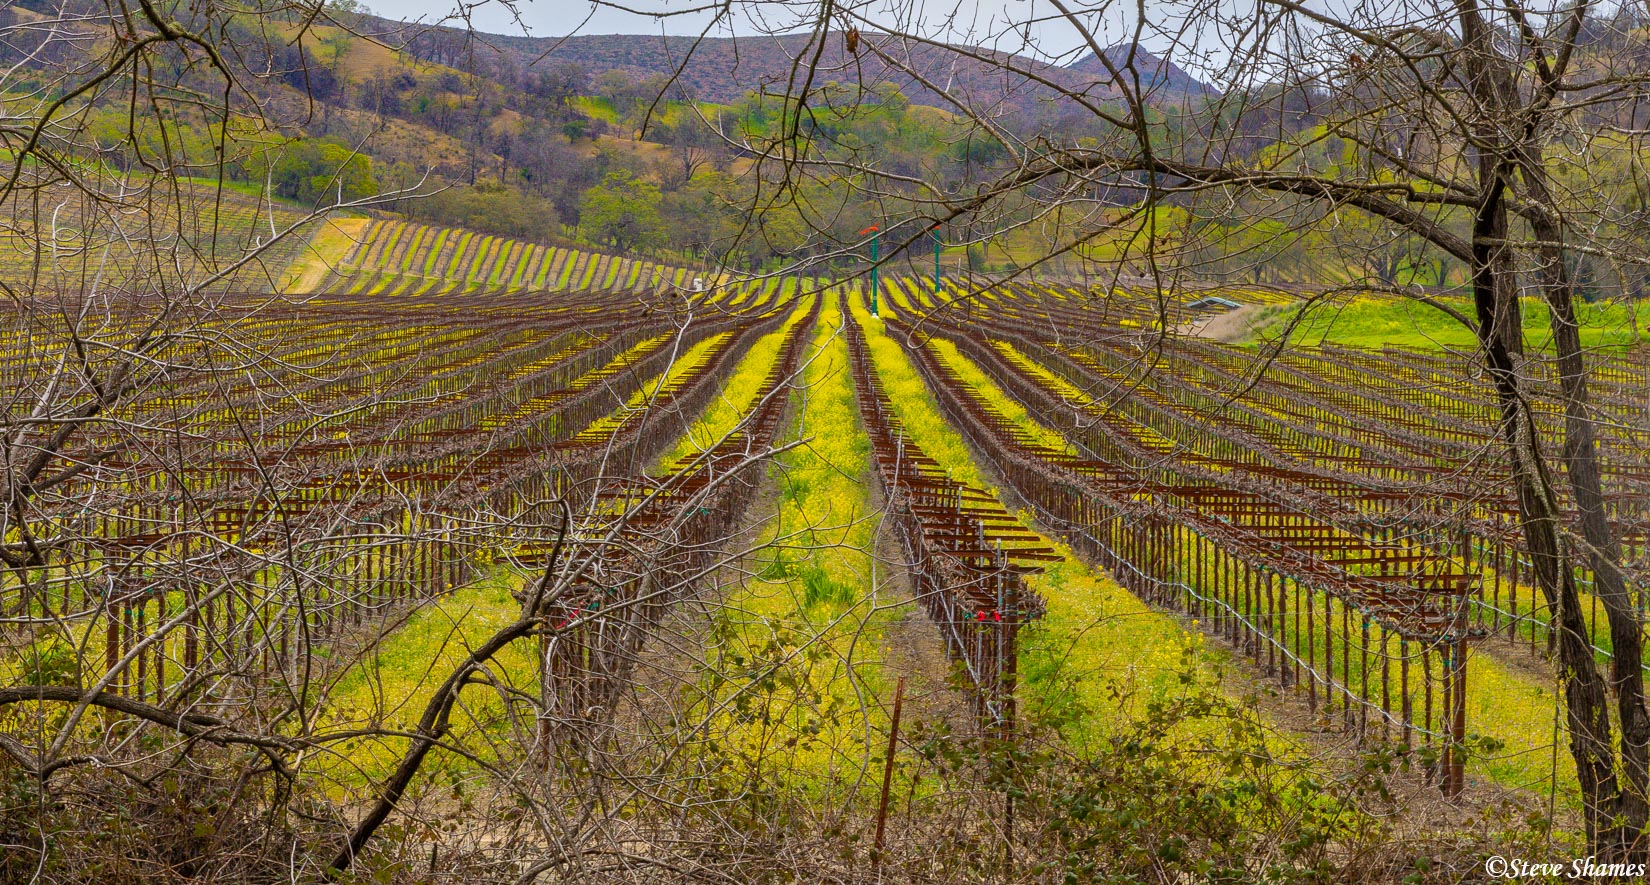 I really liked the looks of this Chiles Valley vineyard, with the bright yellow strips of wild mustard